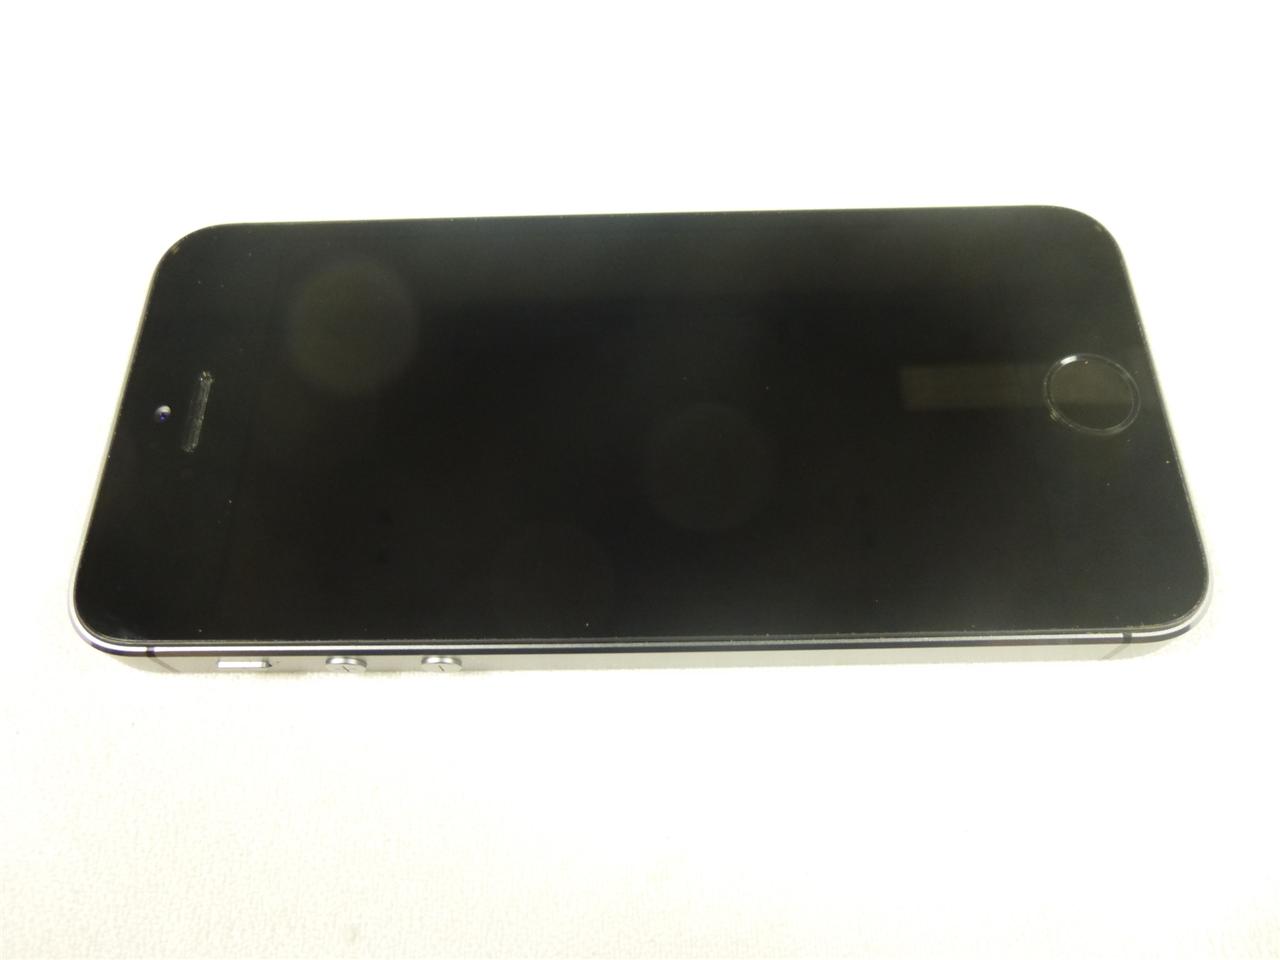 ... UNLOCKED Apple iPhone 5S 16GB - Space Gray - CLEAN ESN - HANDSET ONLY